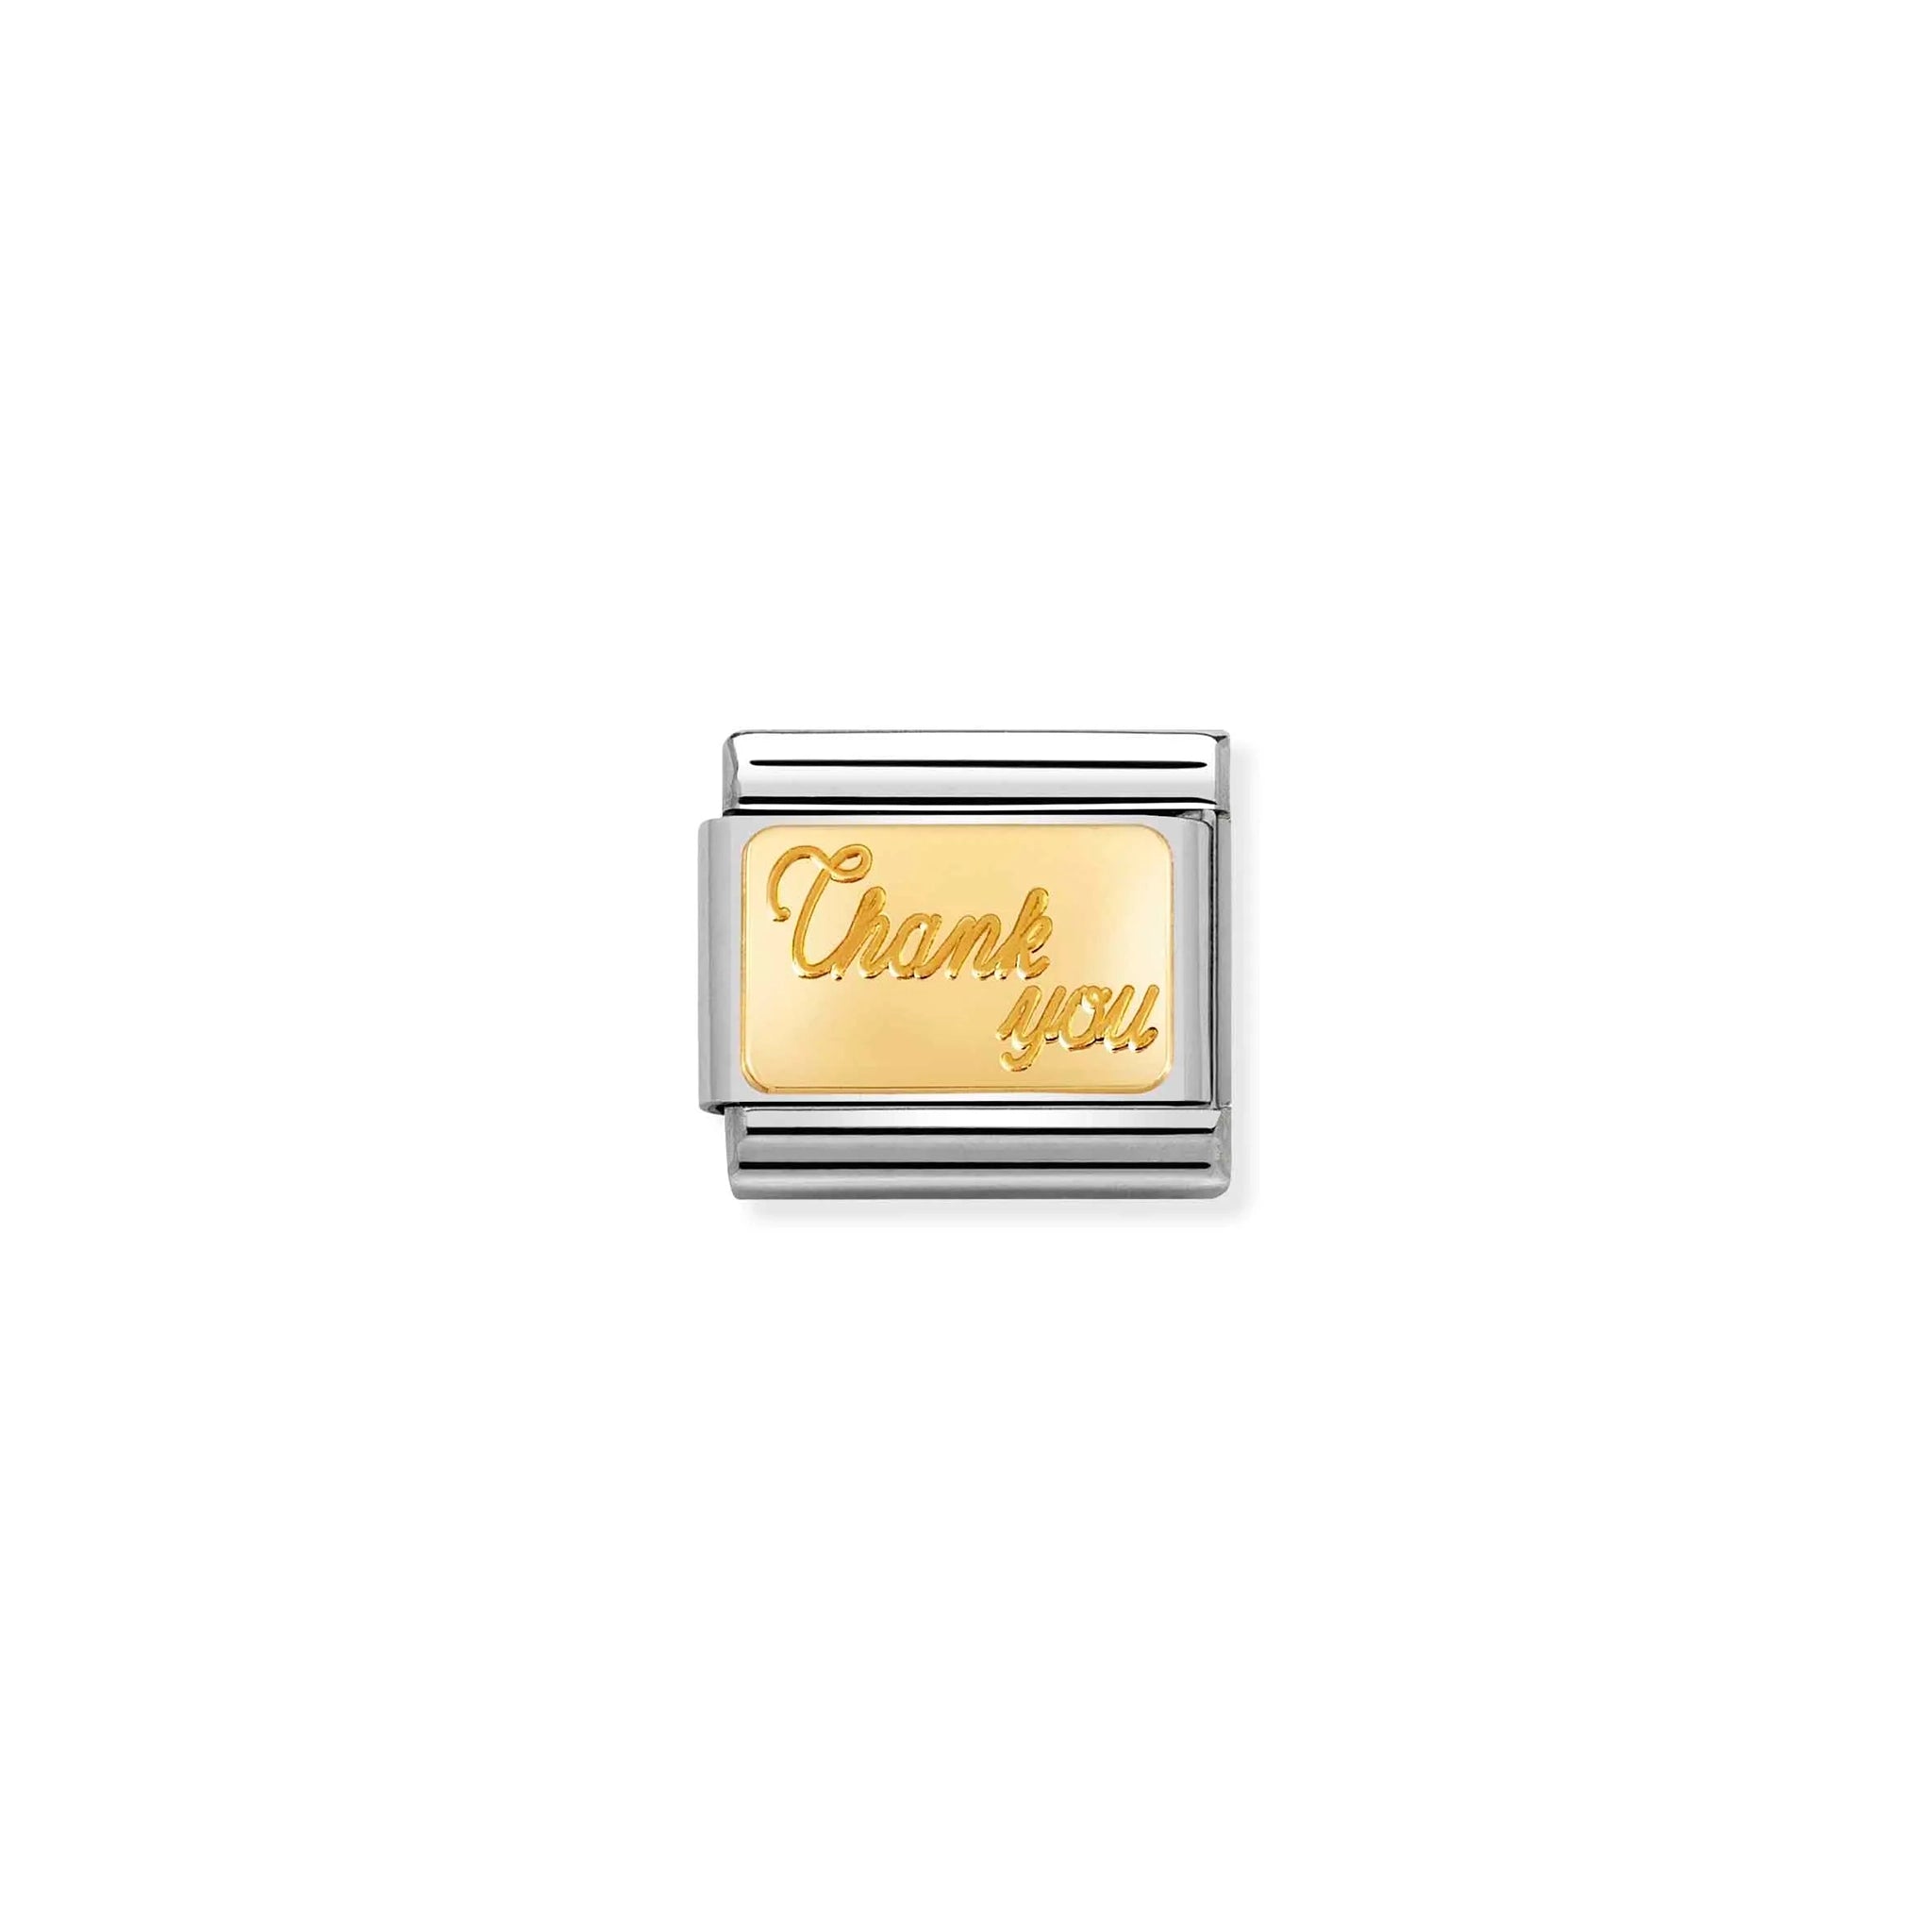 A Nomination charm link featuring a gold plaque engraved with 'thank you'